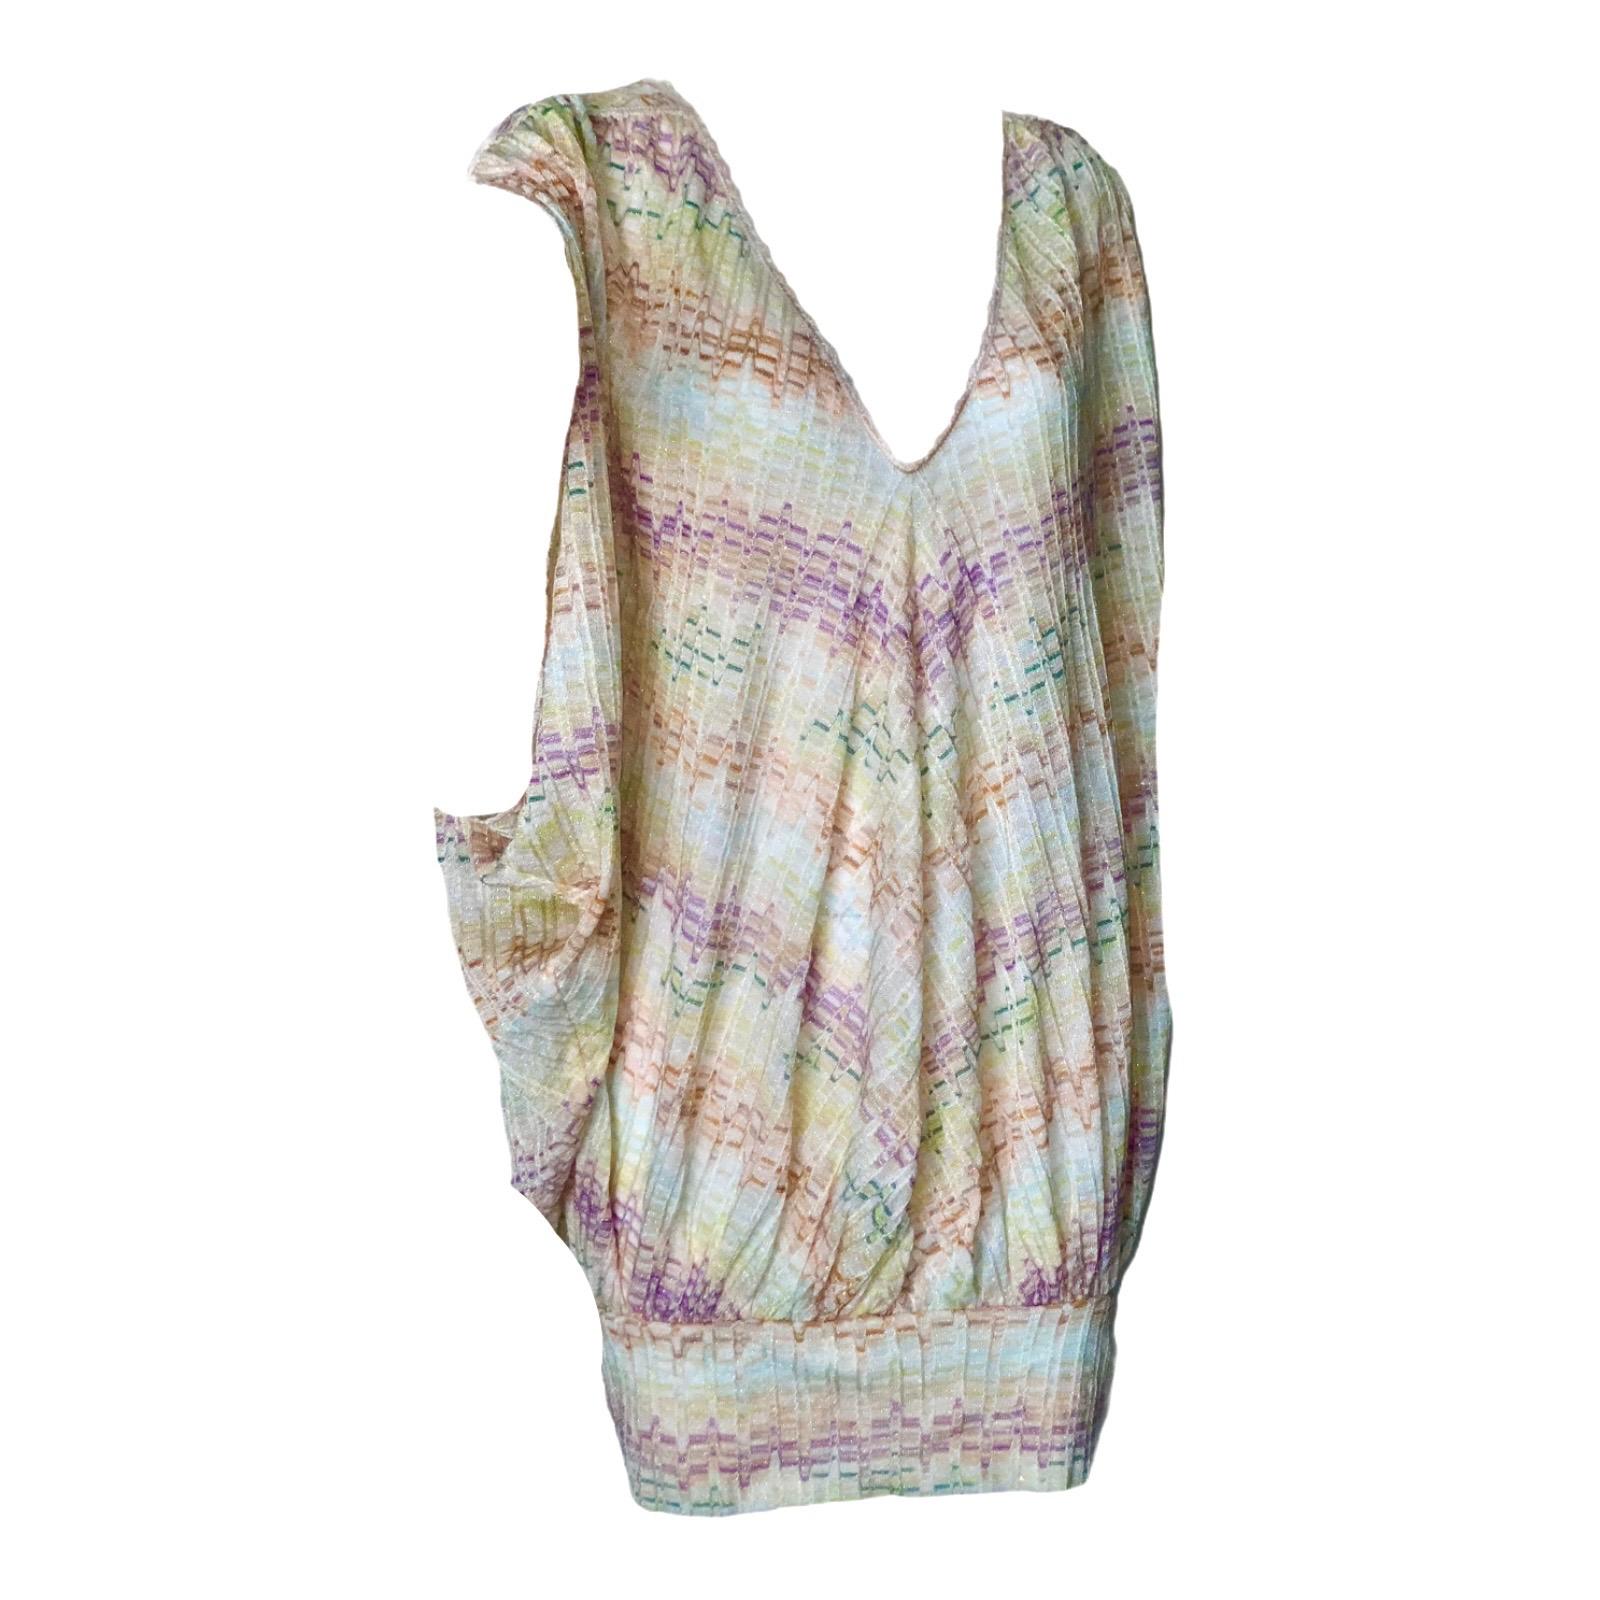 Missoni's multicolored crochet-knit kaftan makes a chic addition to your getaway wardrobe. Wear it over a metallic bikini poolside or on its own with heeled gladiator sandals.

Multicolored crochet-knit kaftan dress
Deep V-neck
Wide draped